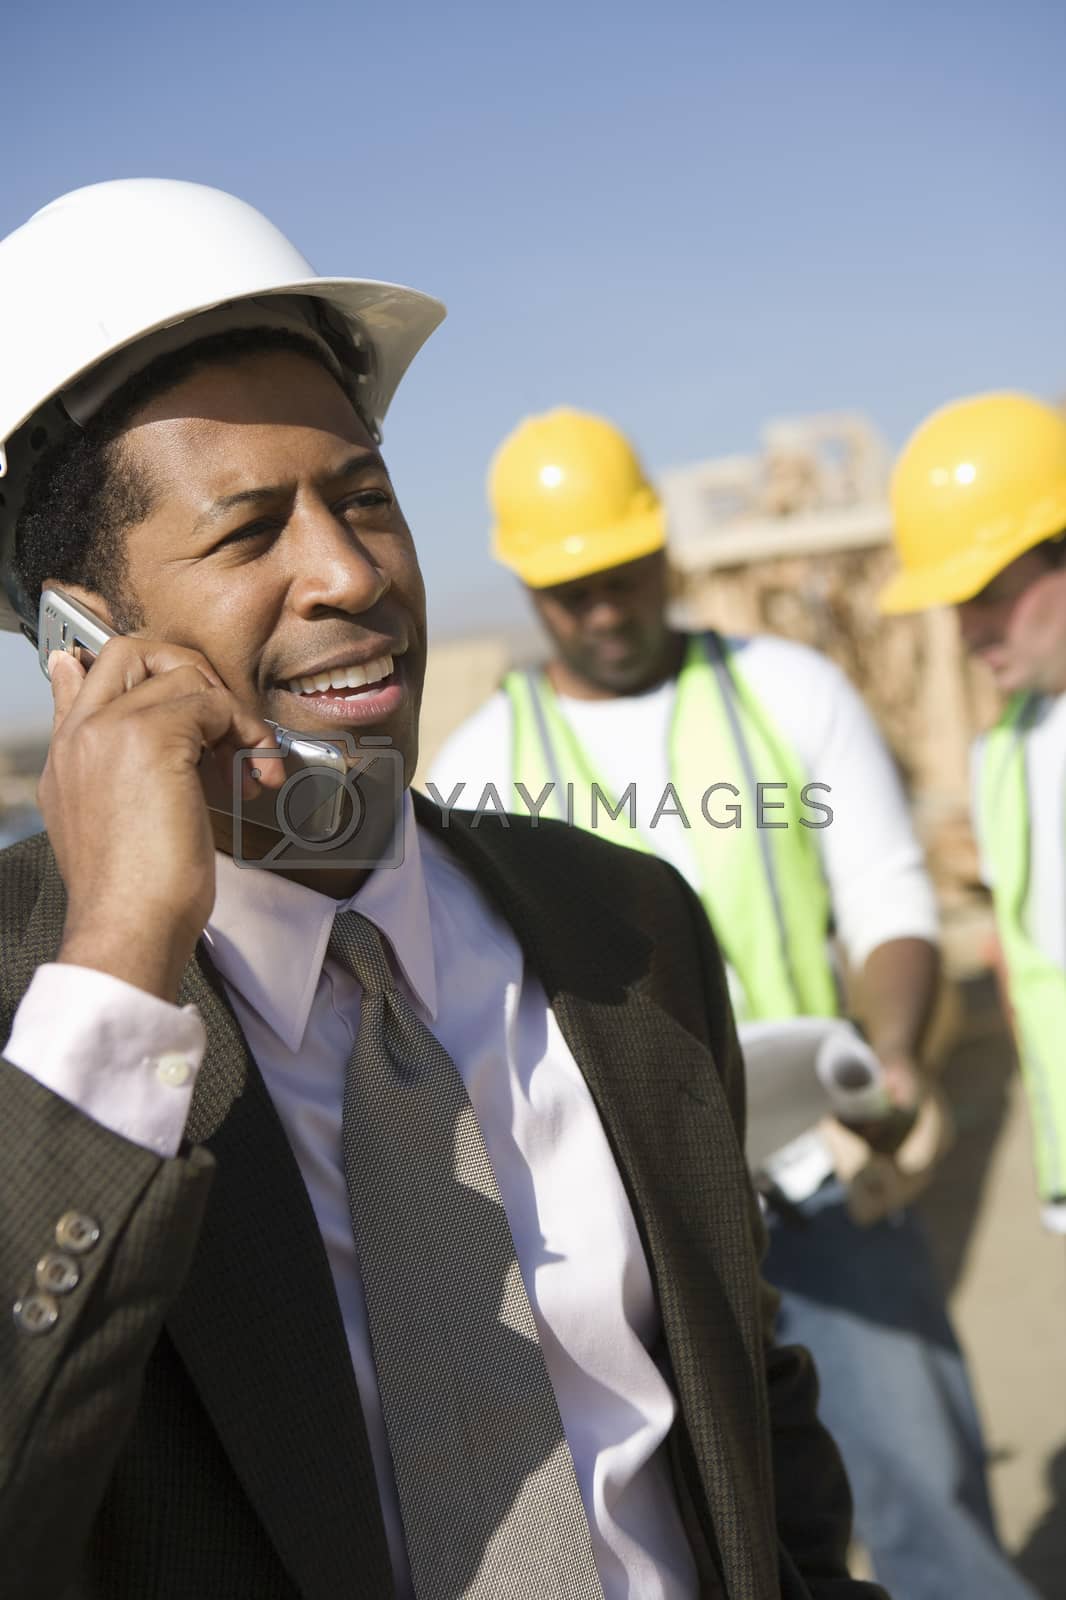 Royalty free image of An architect on a call with men in background at construction site by moodboard